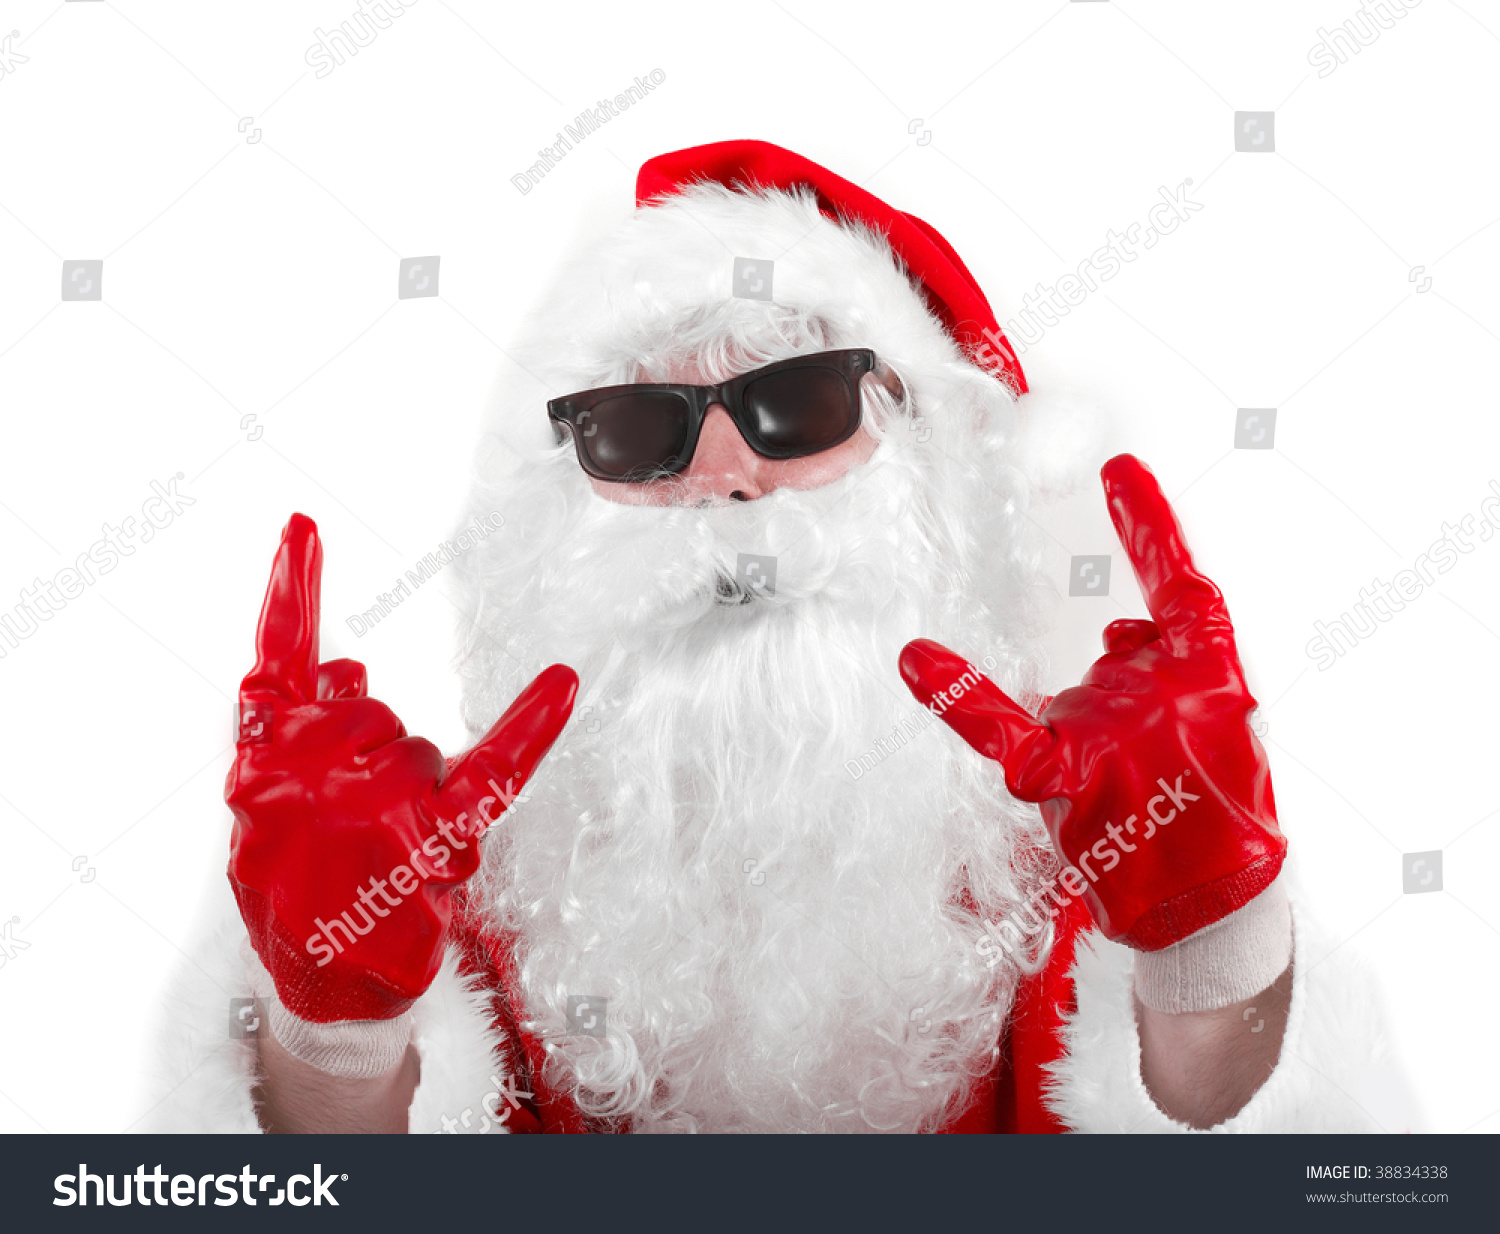 what is the meaning of santa claus